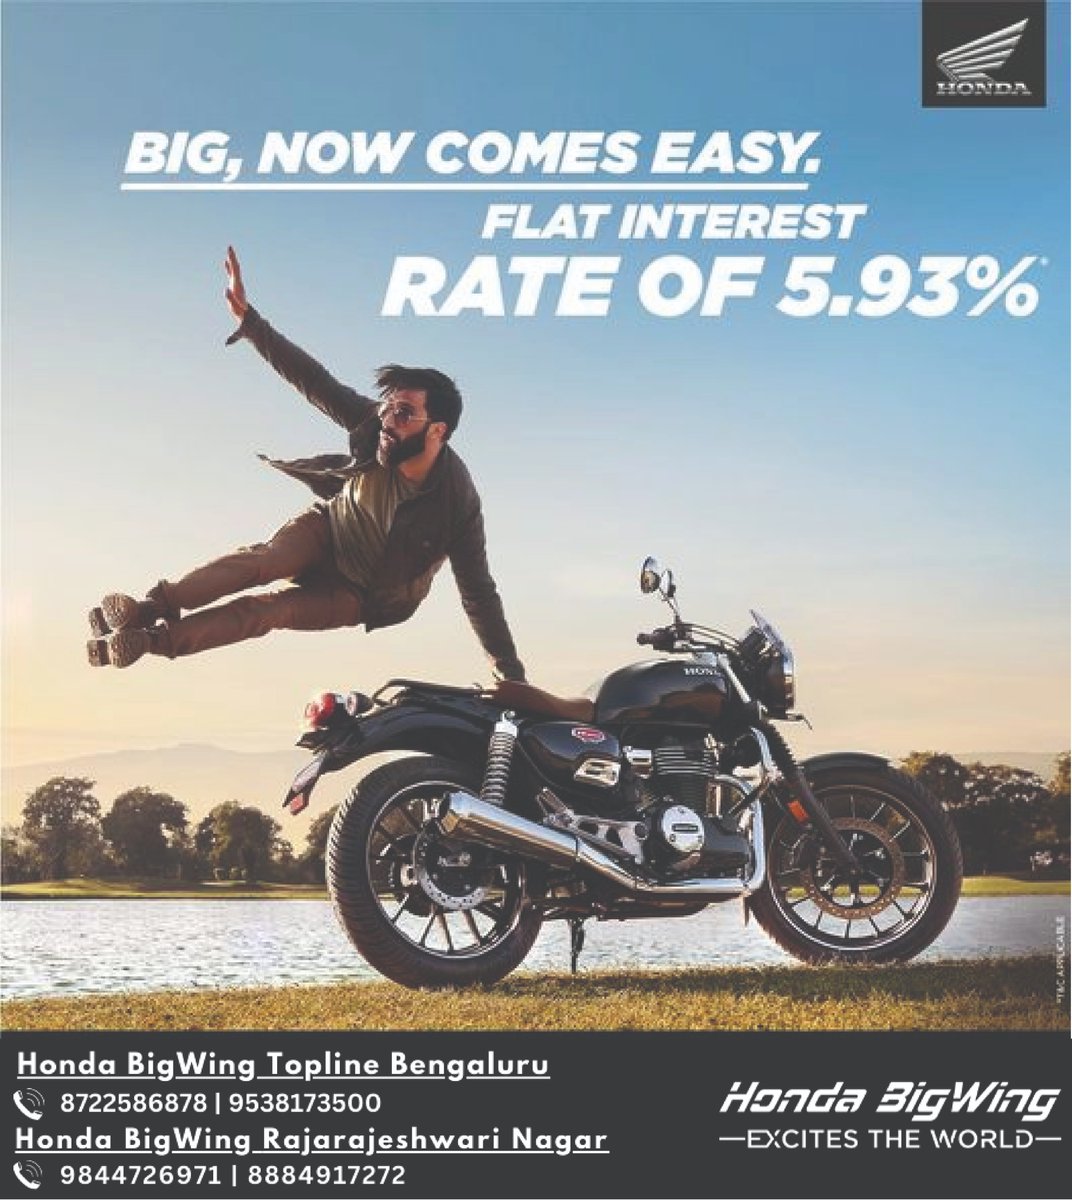 Flaunting your effortless riding style on open roads made easy with a special finance offer on #HnessCB350.
Get a flat interest rate of 5.93% on your favourite H’ness CB350. Head to your nearest #HondaBigWing showroom to know more.